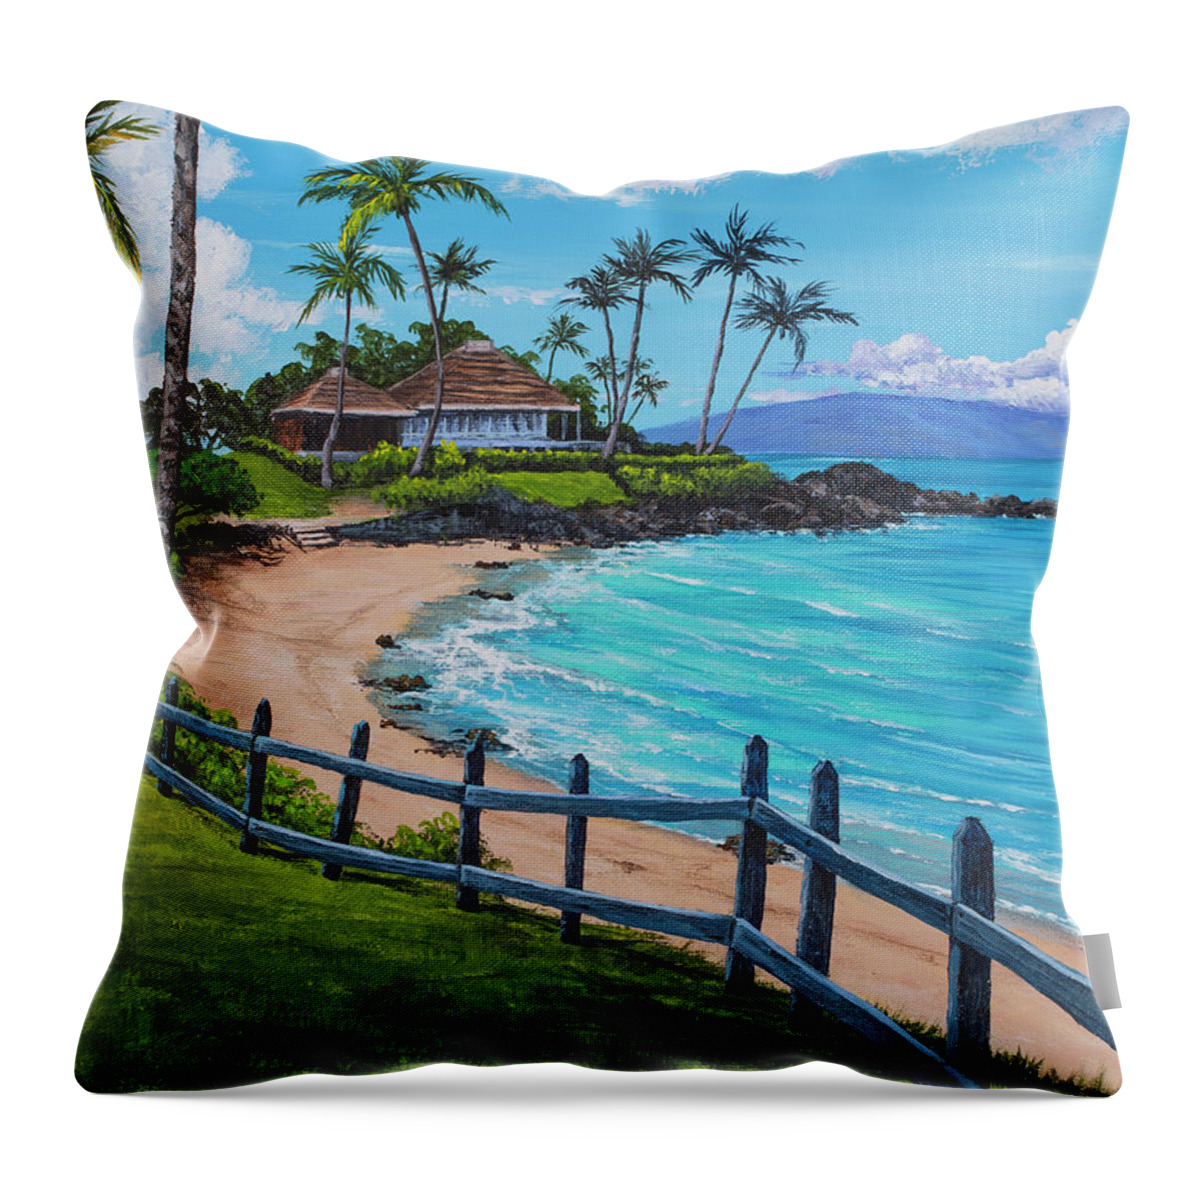 Hawaii Throw Pillow featuring the painting Merrimans At Kapalua Bay by Darice Machel McGuire